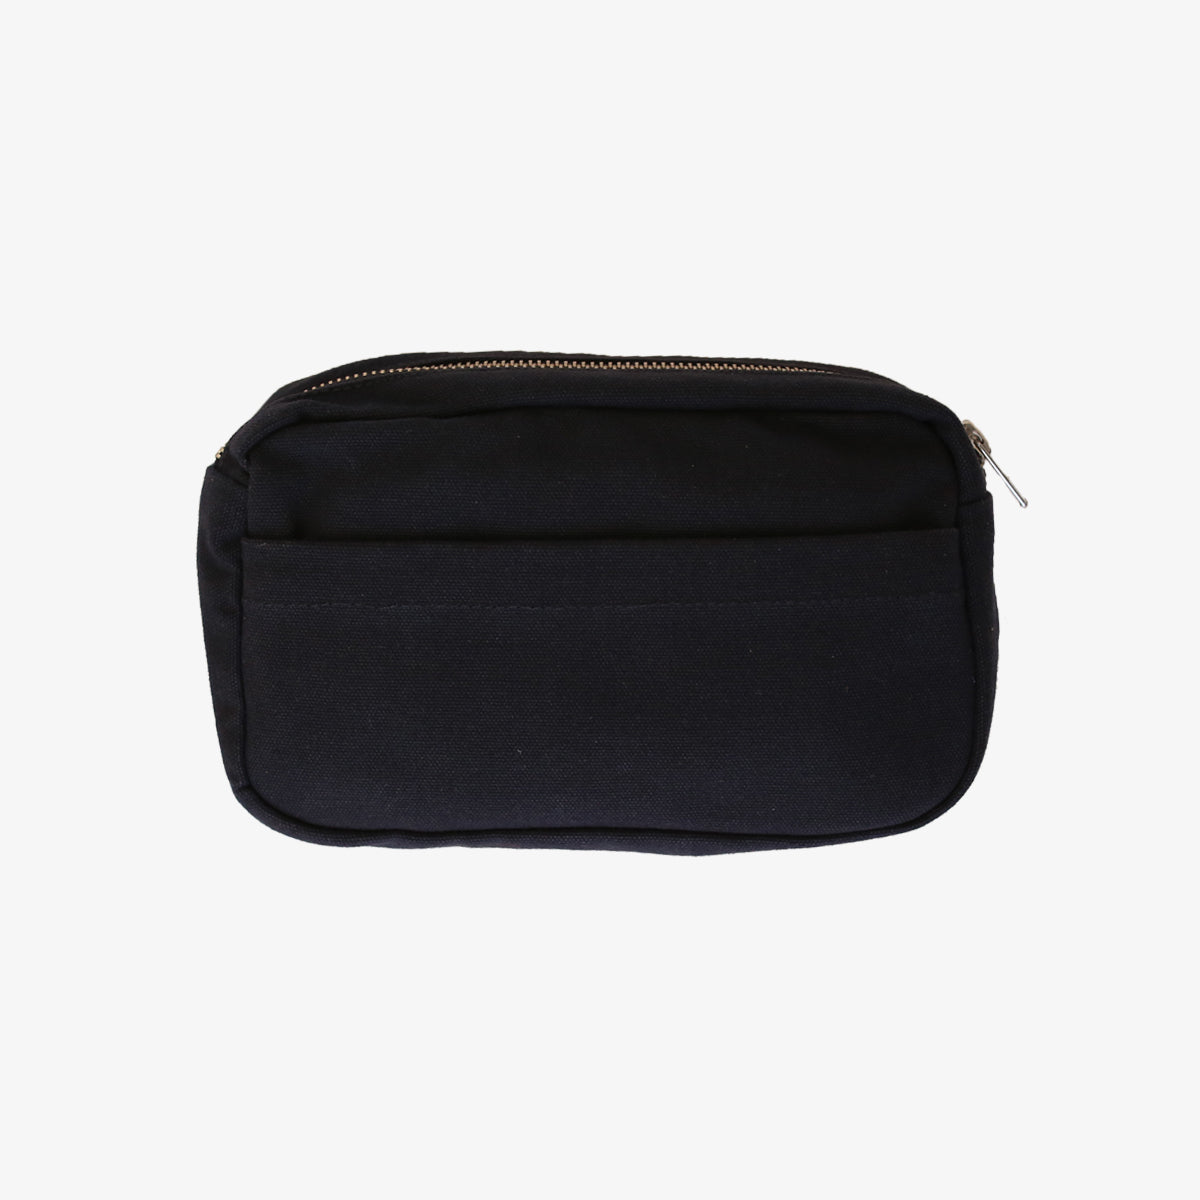 products/Utilitybag_Navy_02.jpg